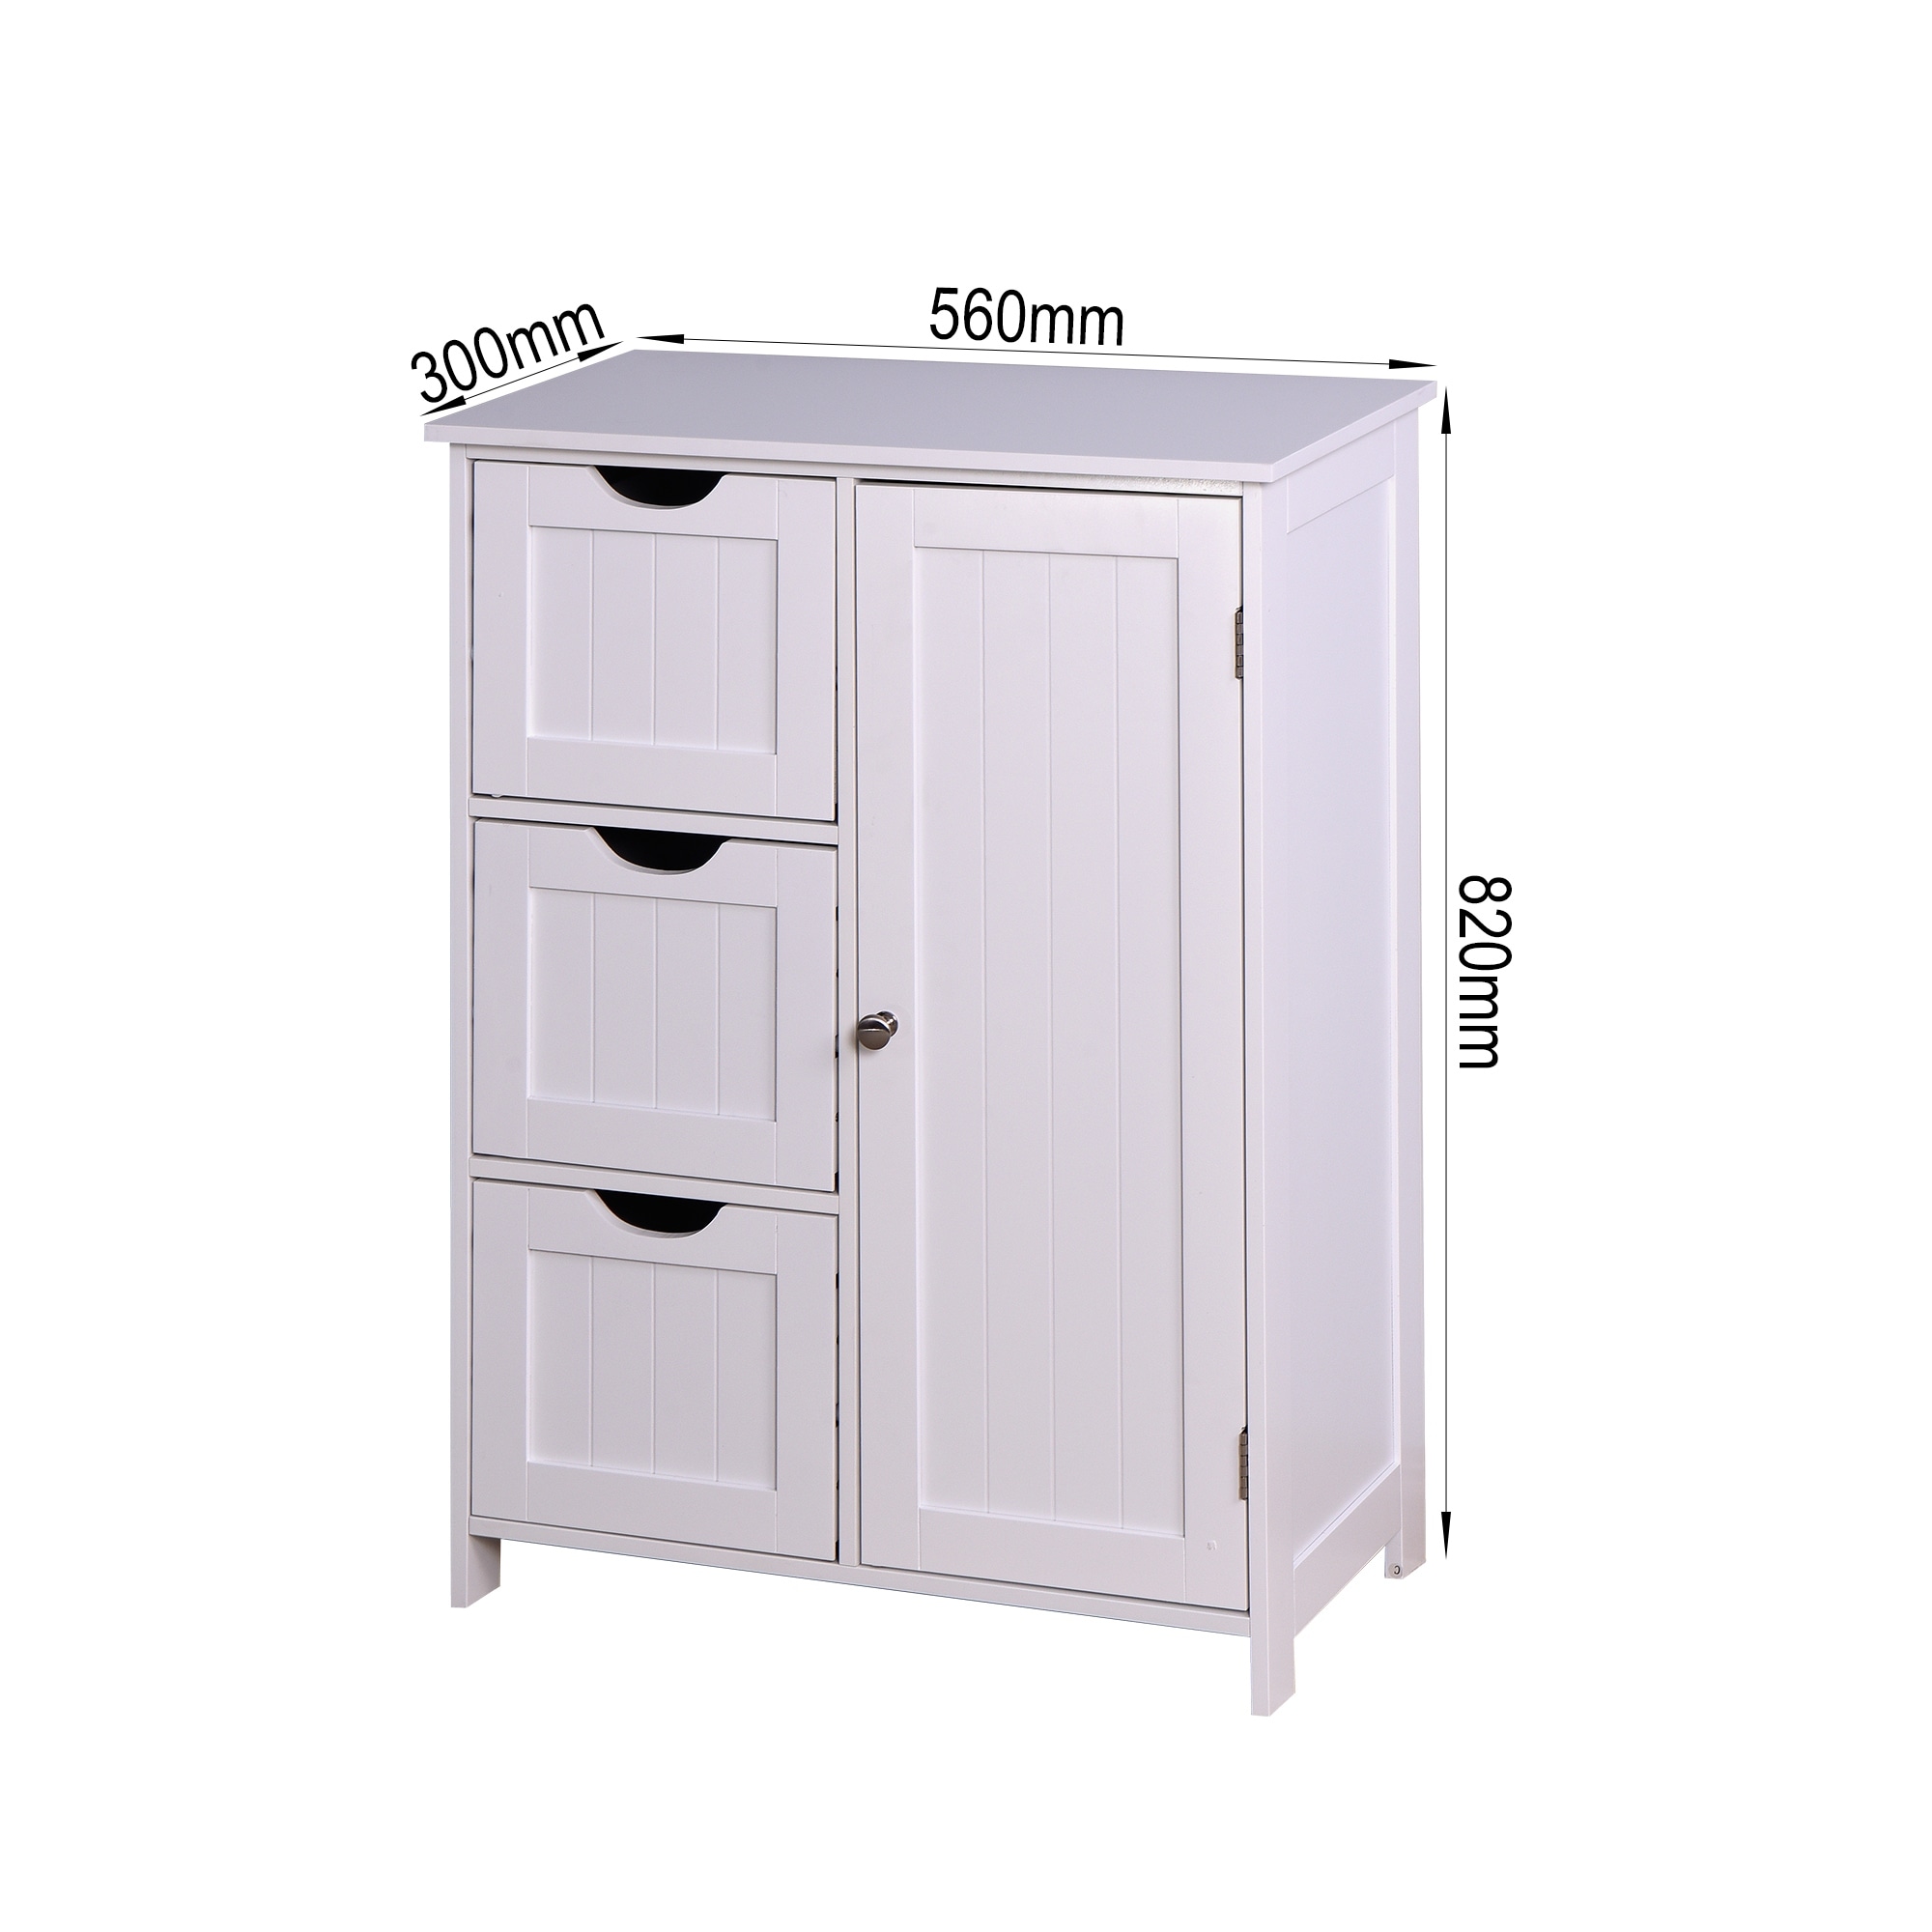 https://ak1.ostkcdn.com/images/products/is/images/direct/9e830e3554bffb99ef4bcfdc315b3b72867877f8/Bathroom-Storage-Cabinet%2C-White-Floor-Cabinet-with-3-Large-Drawers-and-1-Adjustable-Shelf.jpg